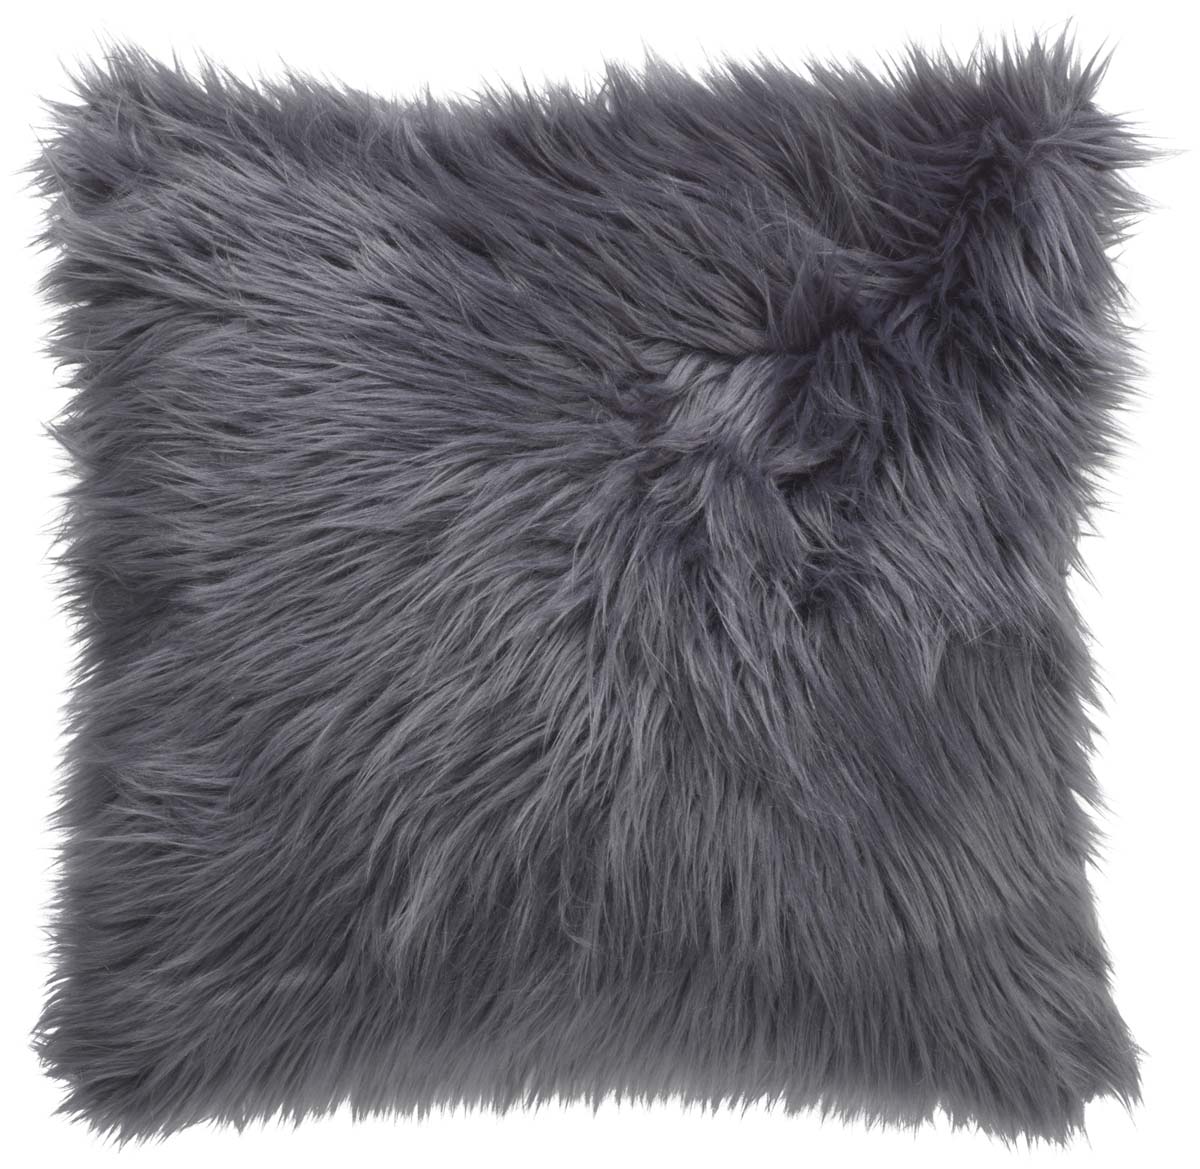 MEES - Kussenhoes 45x45 cm -  donkergrijs- antraciet - fluffy - superzacht